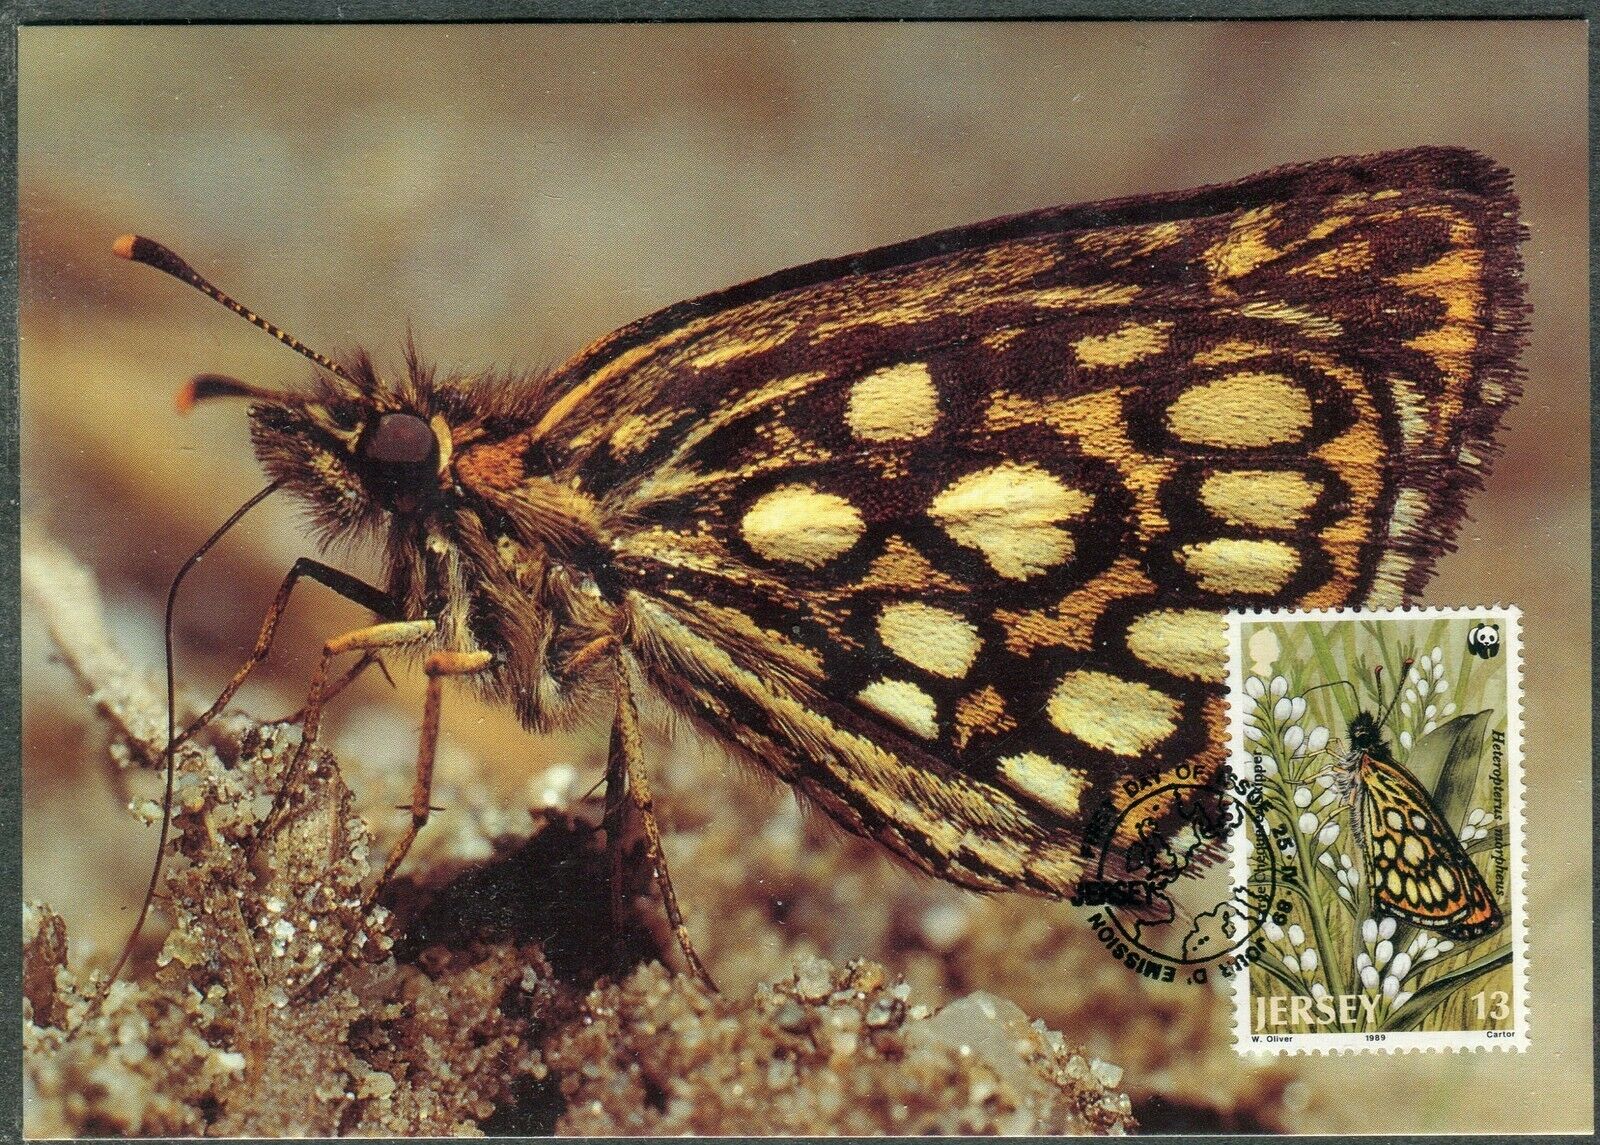 008 - Jersey 2004 - Wwf - Insect - Large Chequered Skipper - Maximum Card - Mc